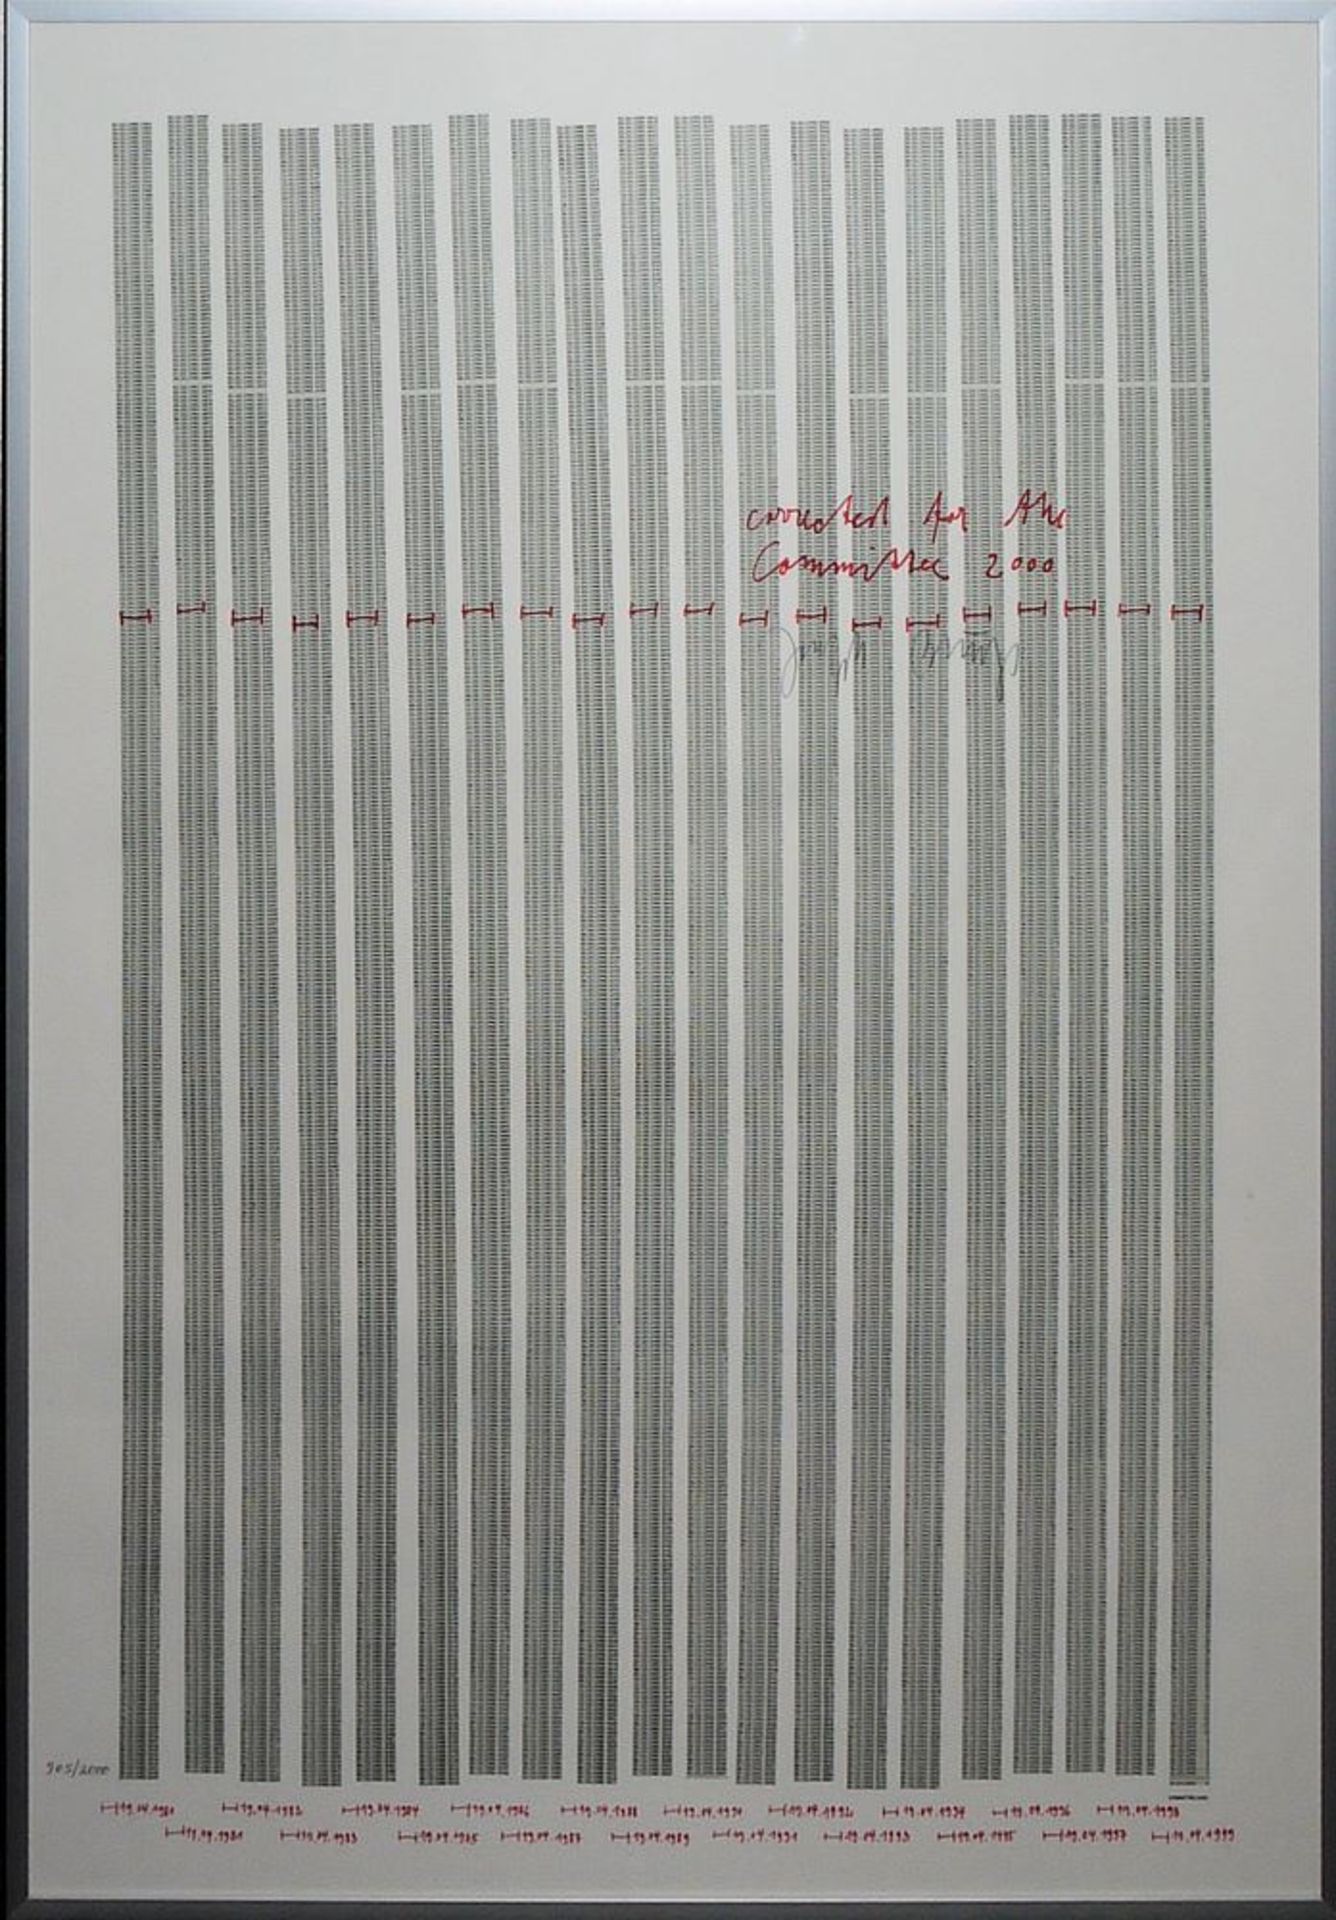 Joseph Beuys, Countdown 2000, signed colour offset from 1981, framed